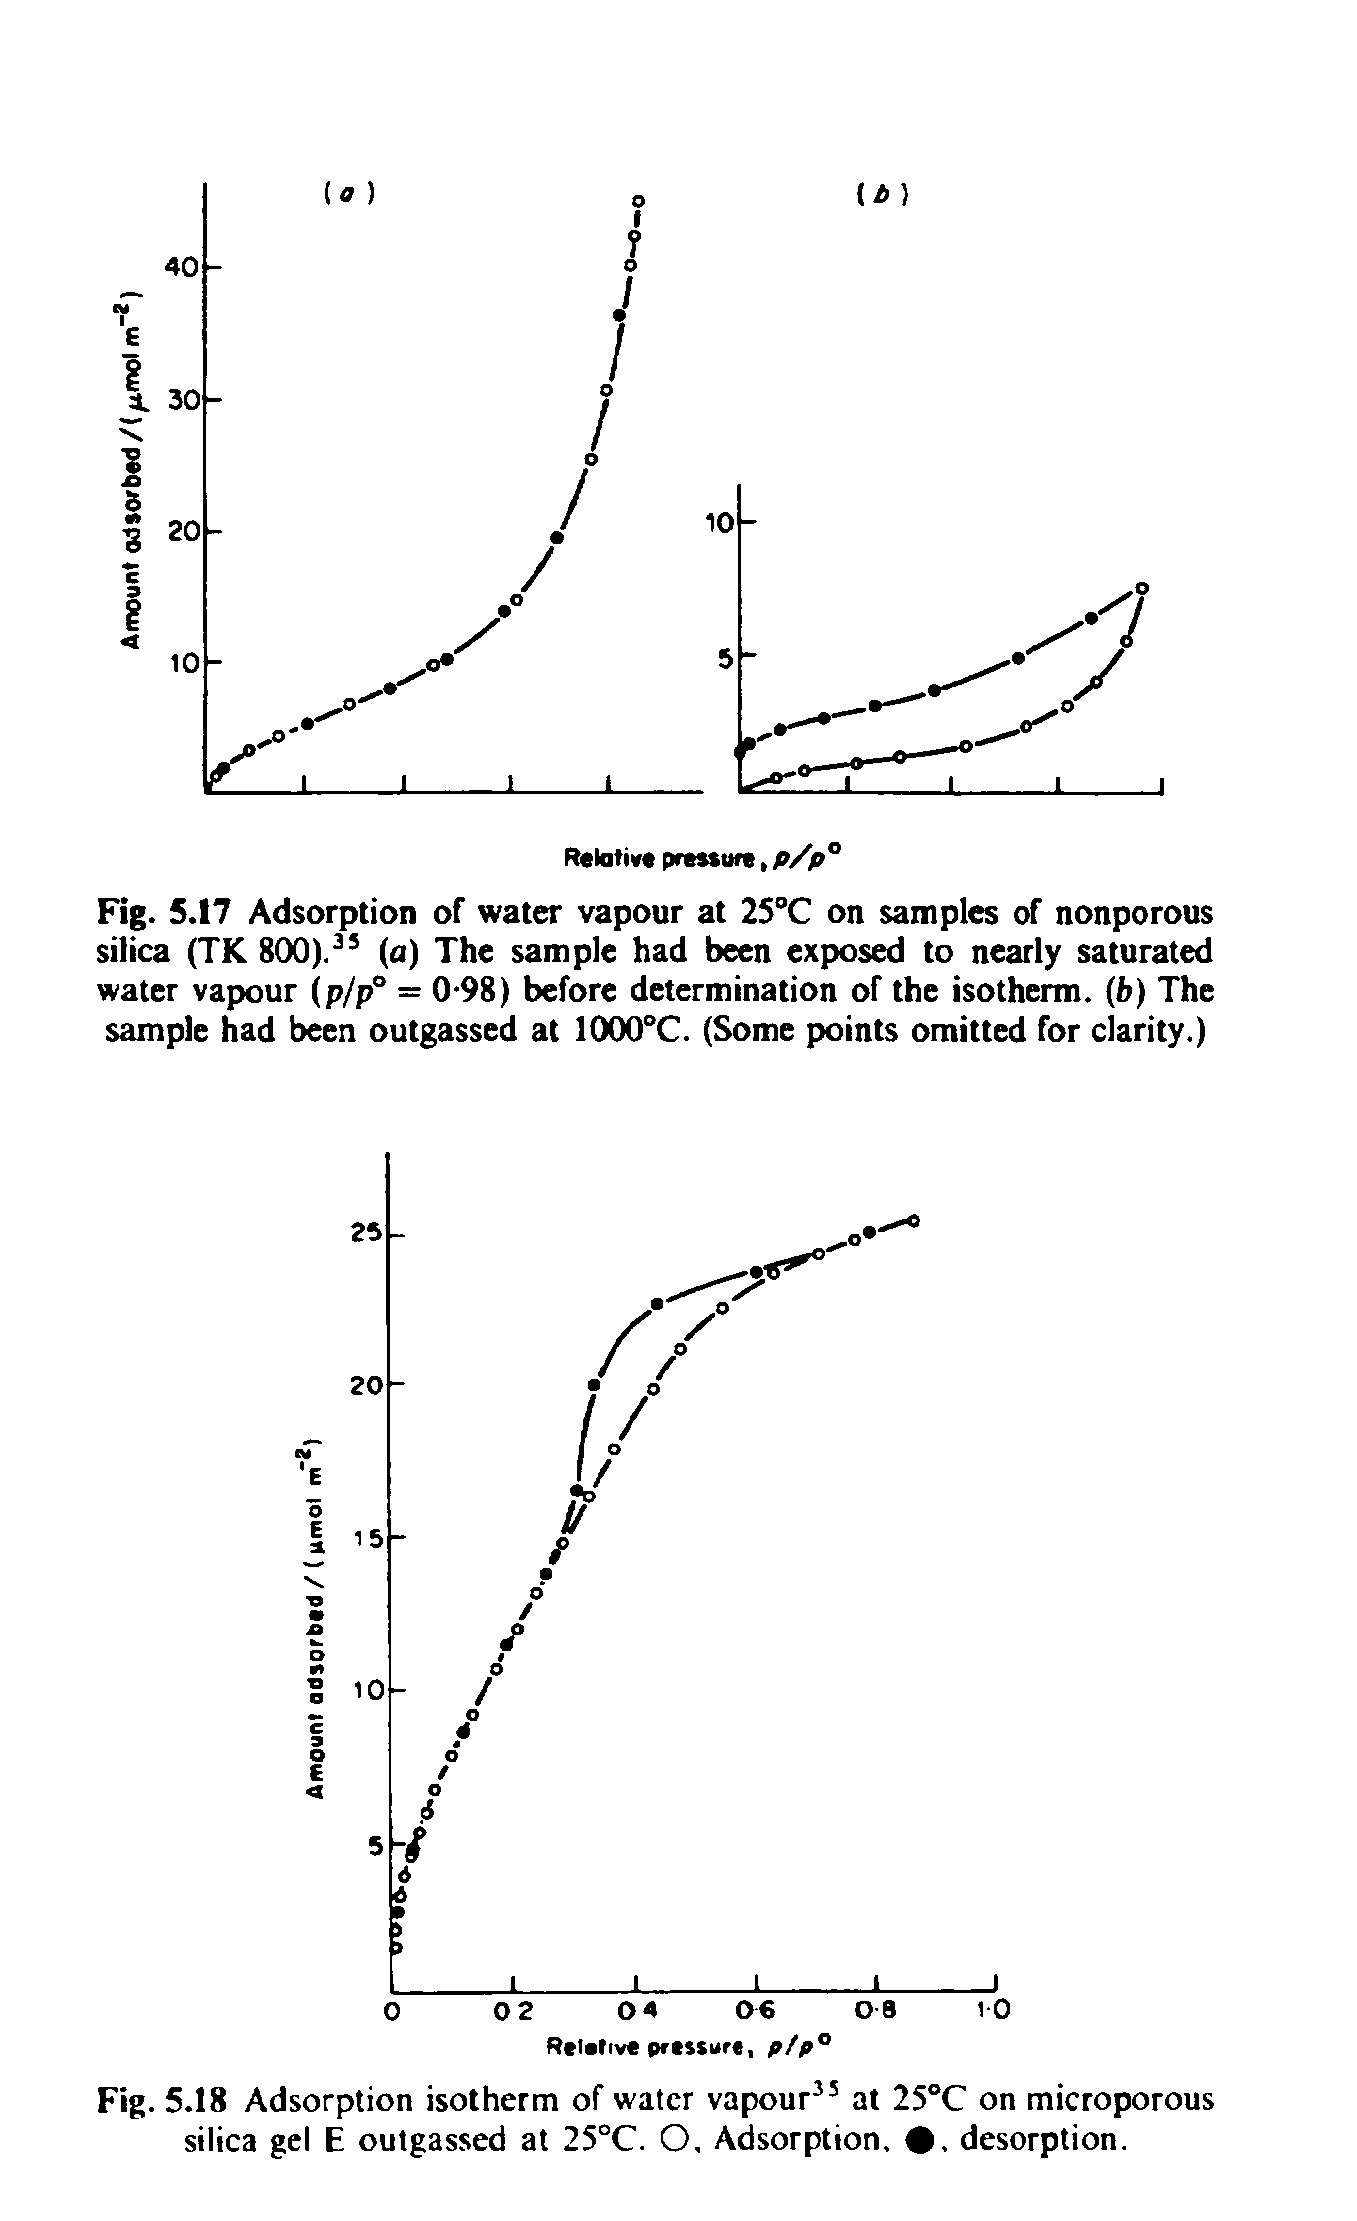 Fig. 5.17 Adsorption of water vapour at 25°C on samples of nonporous silica (TK 800). (a) The sample had been exposed to nearly saturated water vapour (p/p° = 0-98) before determination of the isotherm, (b) The sample had been outgassed at 1000°C. (Some points omitted for clarity.)...